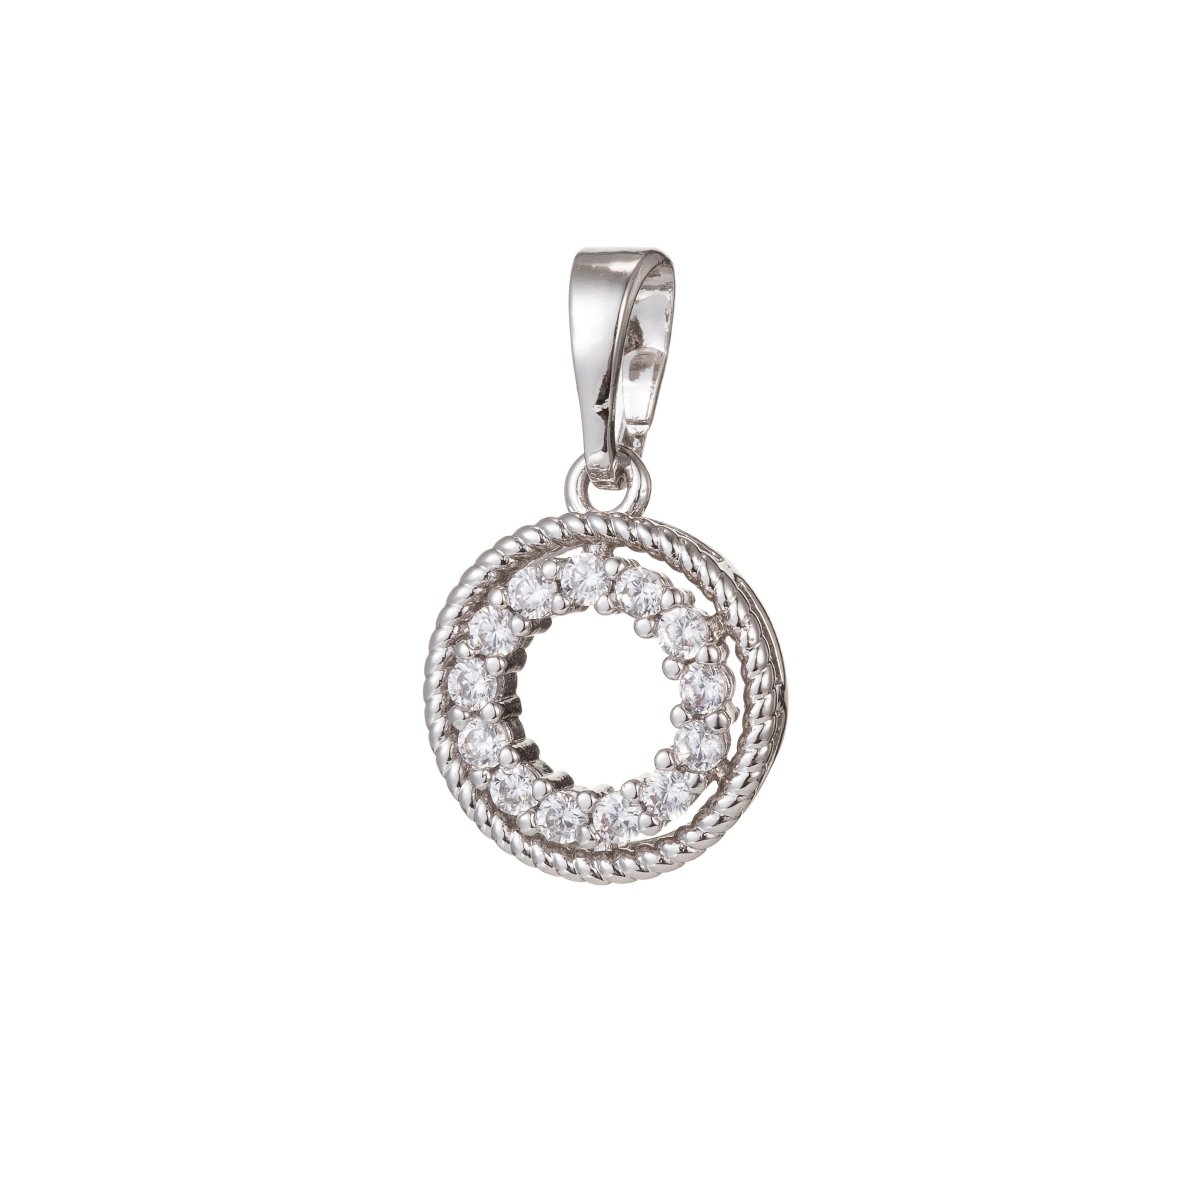 1pc White Gold Filled Micro Pave CZ Circle Pendant Charm, Micro Pave CZ Pendant Charm, White Gold Filled Geometric Pendant, For DIY Jewelry - DLUXCA